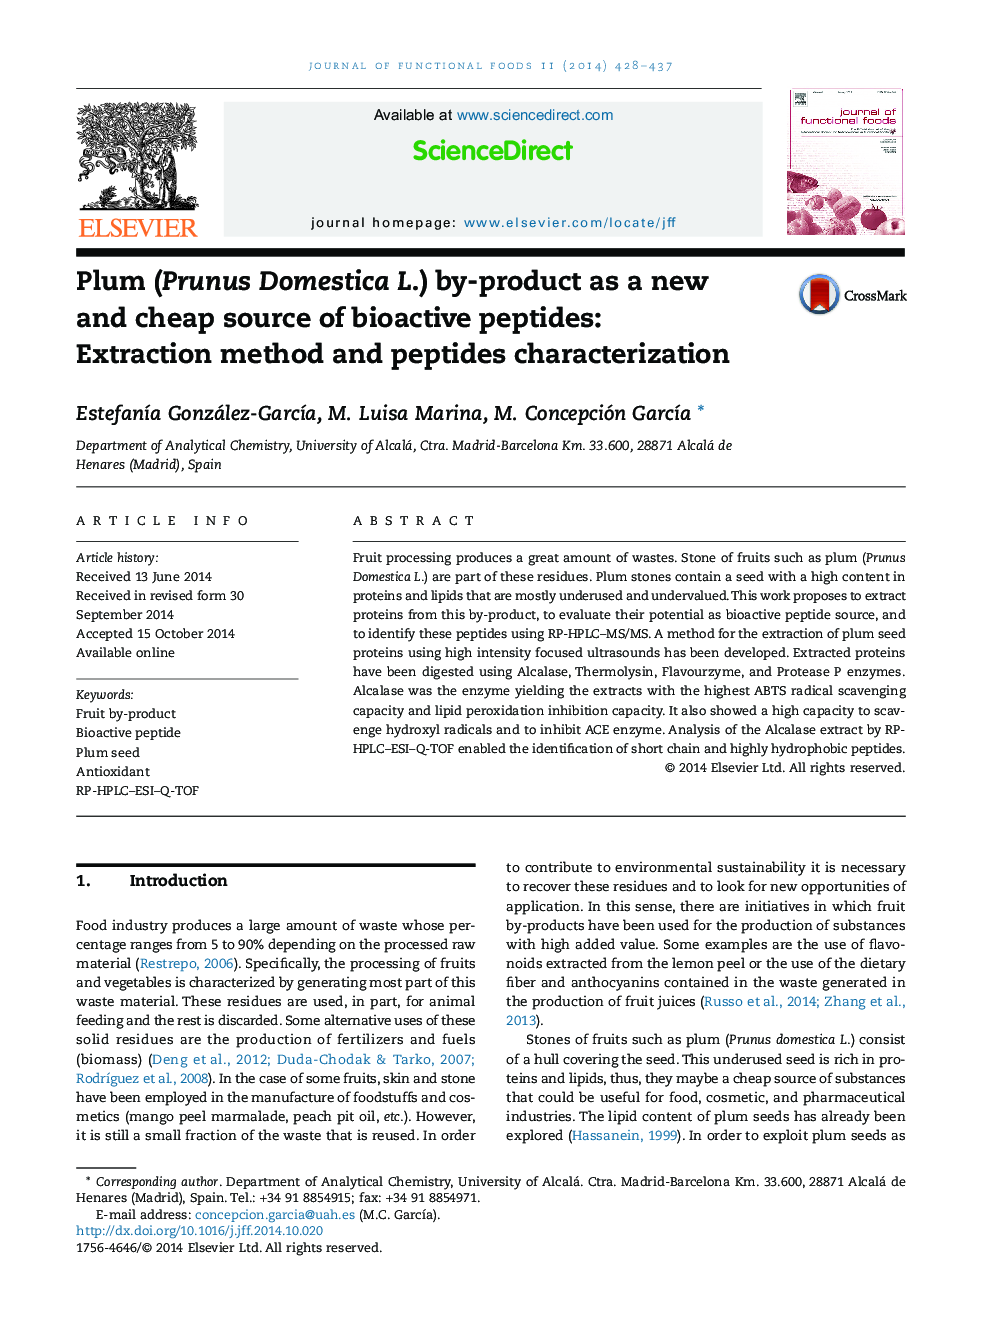 Plum (Prunus Domestica L.) by-product as a new and cheap source of bioactive peptides: Extraction method and peptides characterization